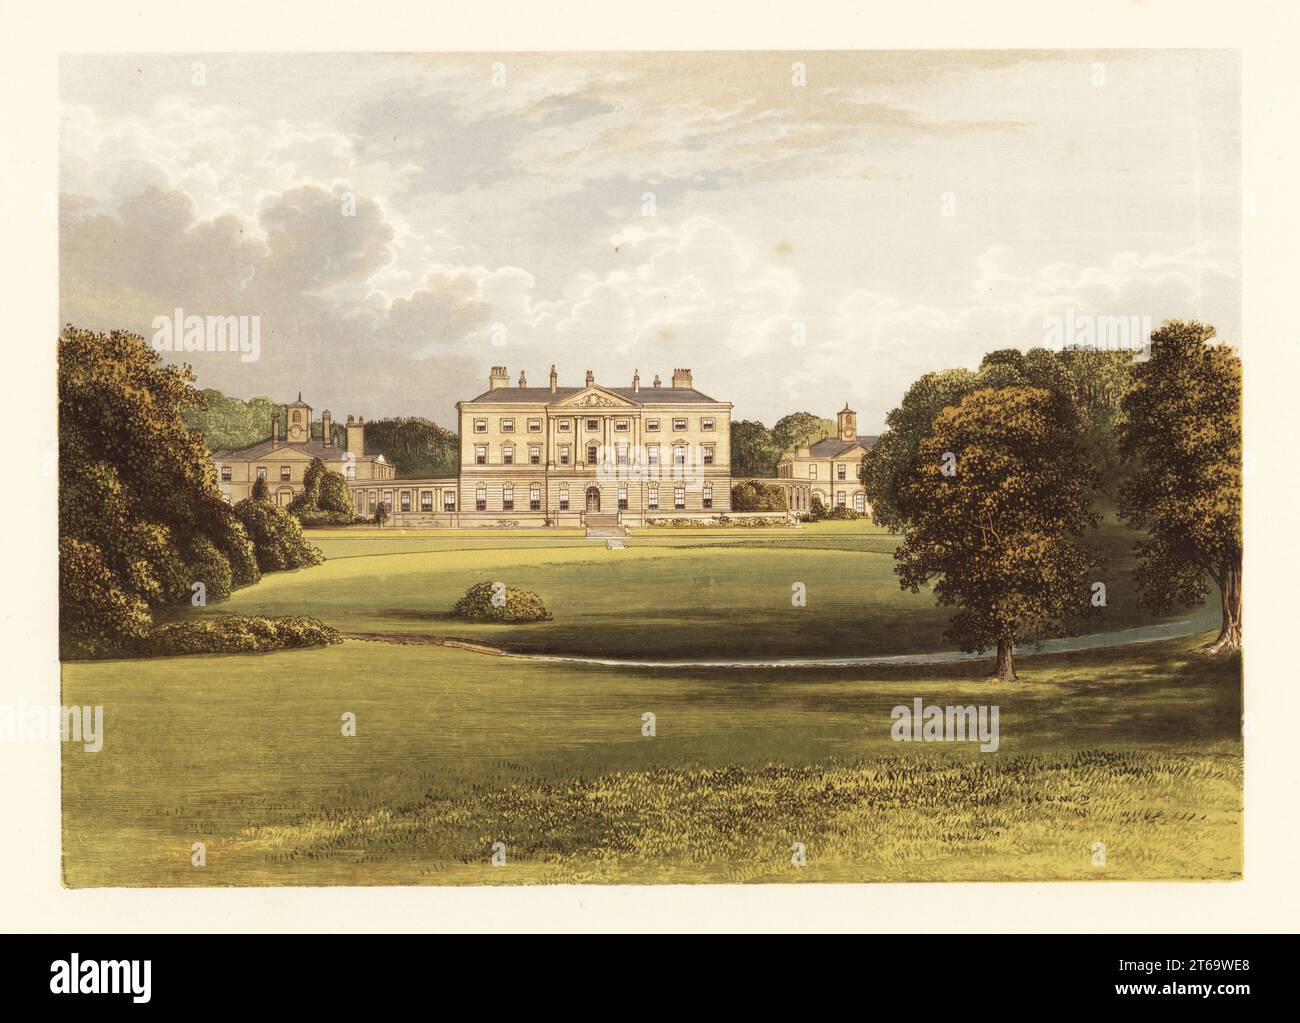 Howick Hall, Northumberland, England. Neo-classical mansion built in the late 18th century for Charles Grey, 2nd Earl Grey, Prime Minister and slavery abolitionist. Colour woodblock by Benjamin Fawcett in the Baxter process of an illustration by Alexander Francis Lydon from Reverend Francis Orpen Morriss Picturesque Views of the Seats of Noblemen and Gentlemen of Great Britain and Ireland, William Mackenzie, London, 1880. Stock Photo